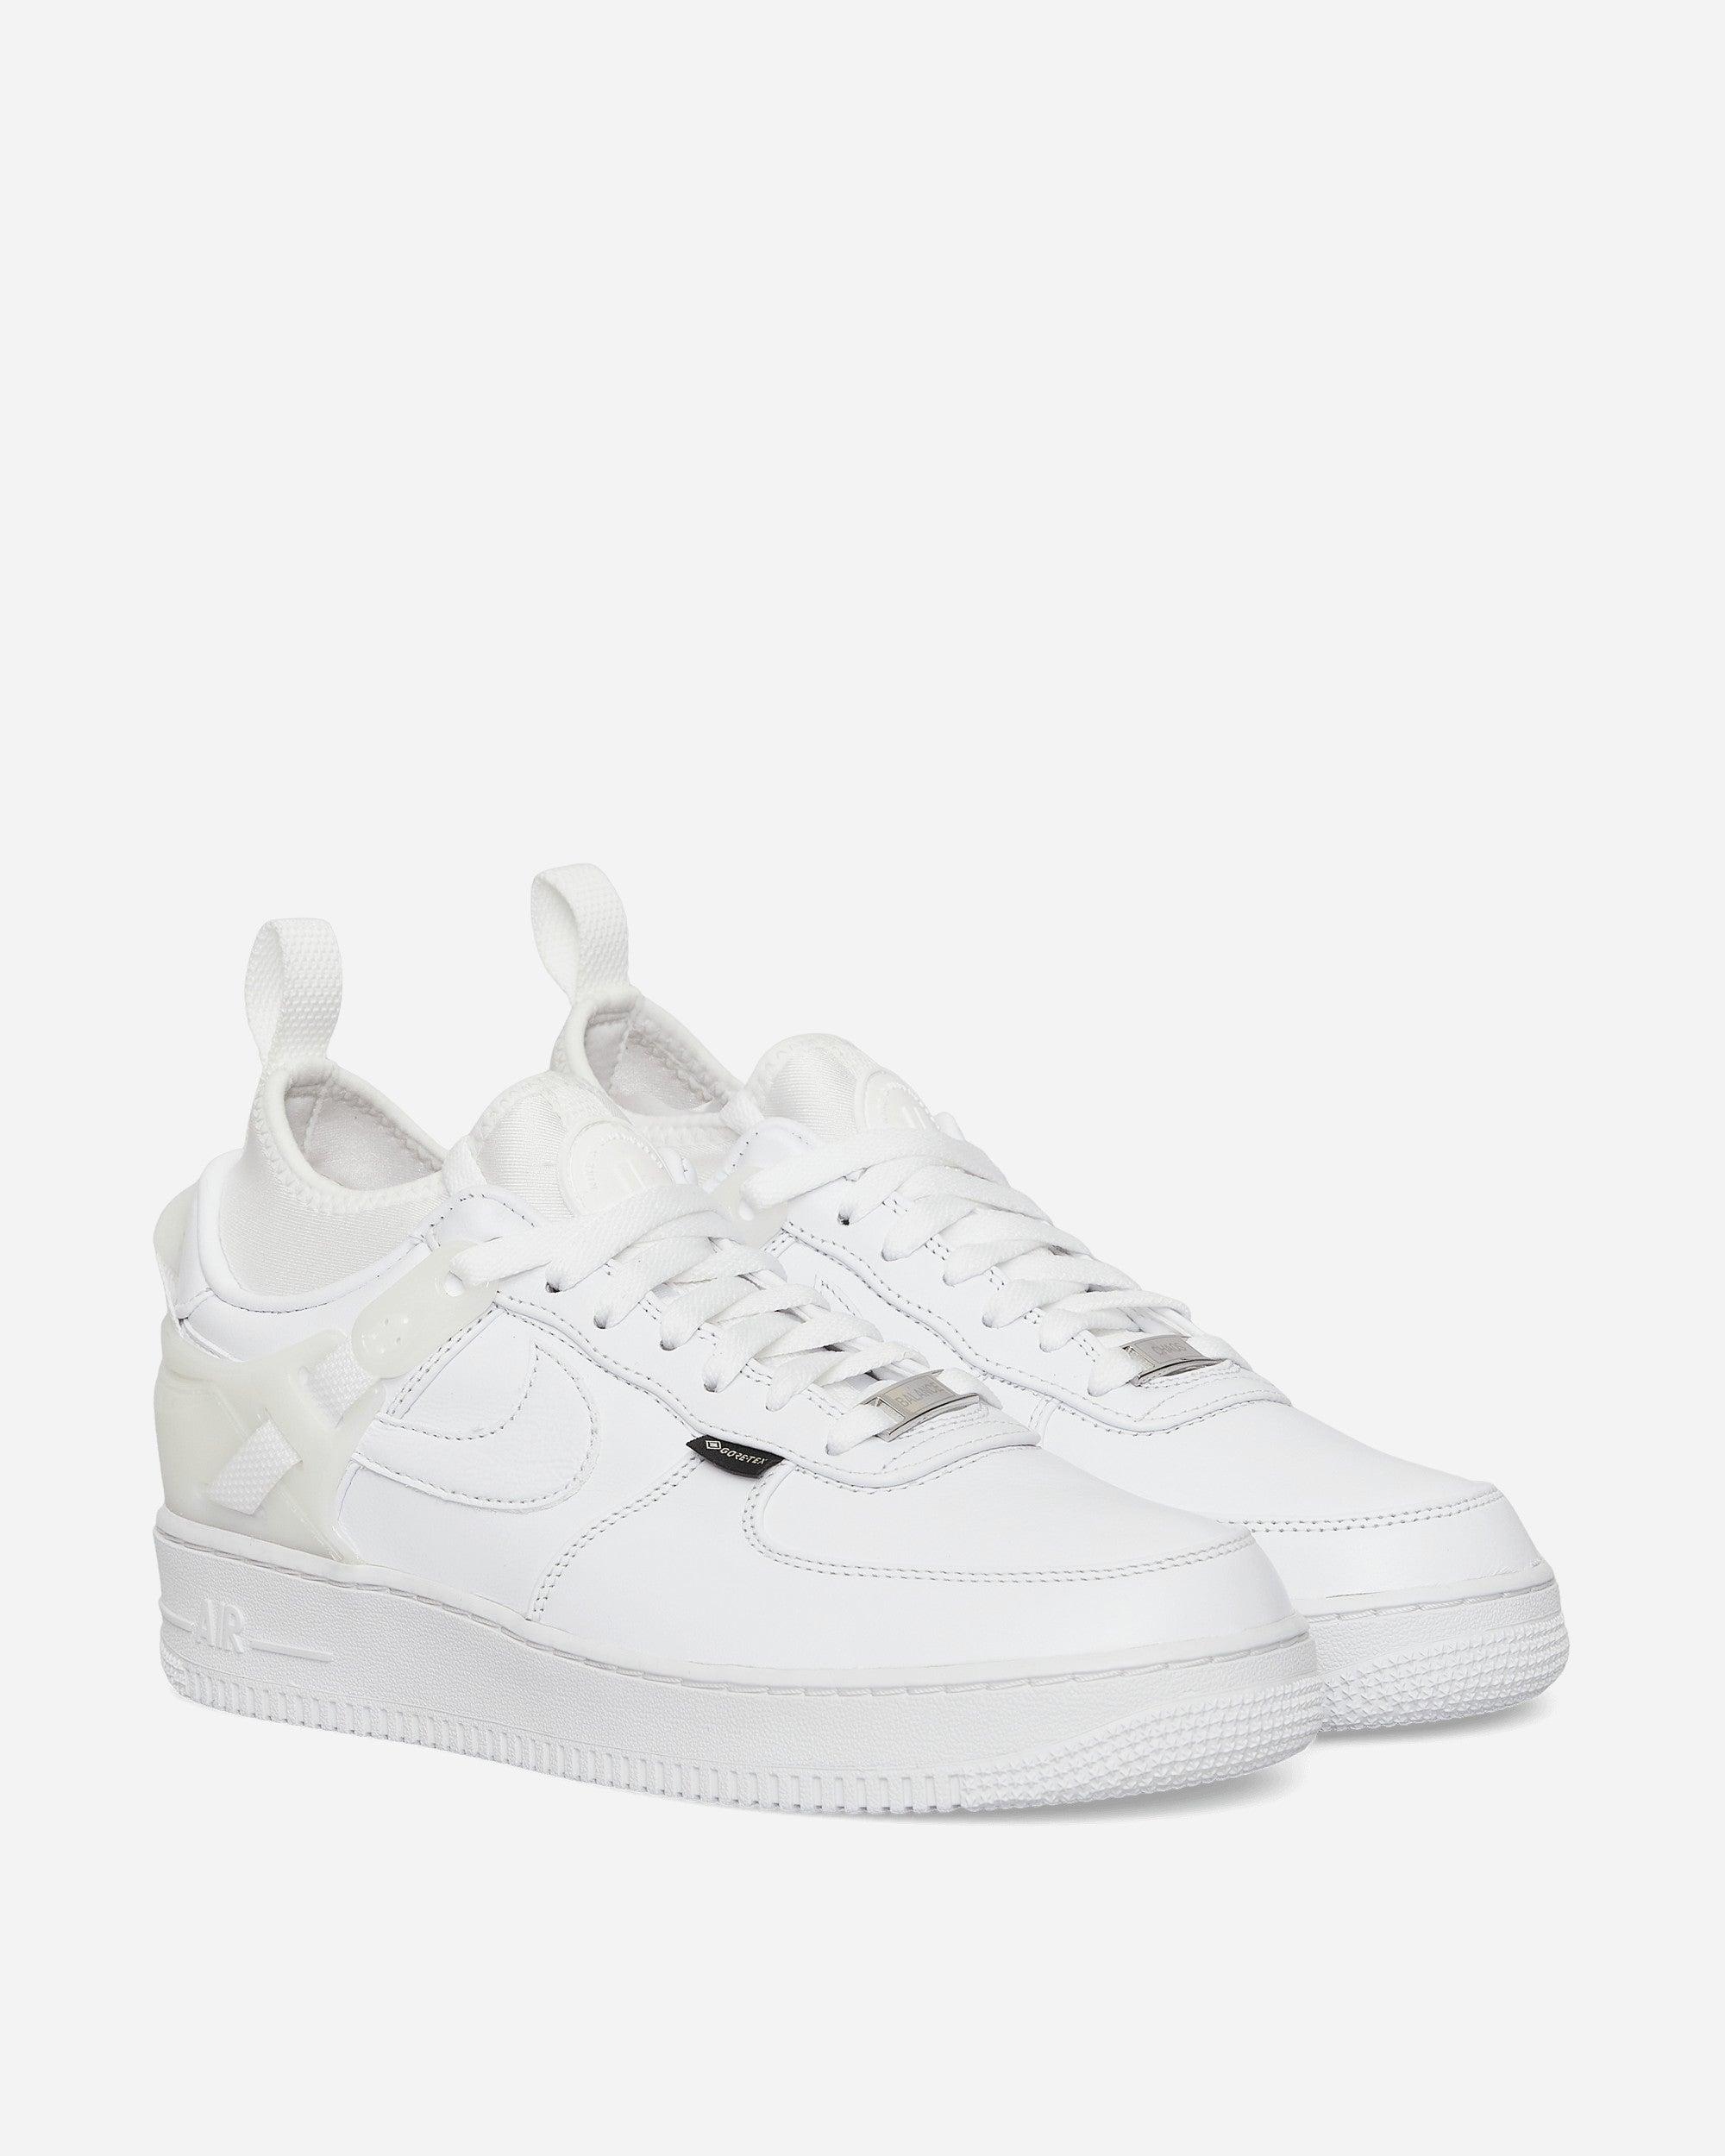 Nike Air Force 1 Low Sp X Undercover Shoes in White | Lyst